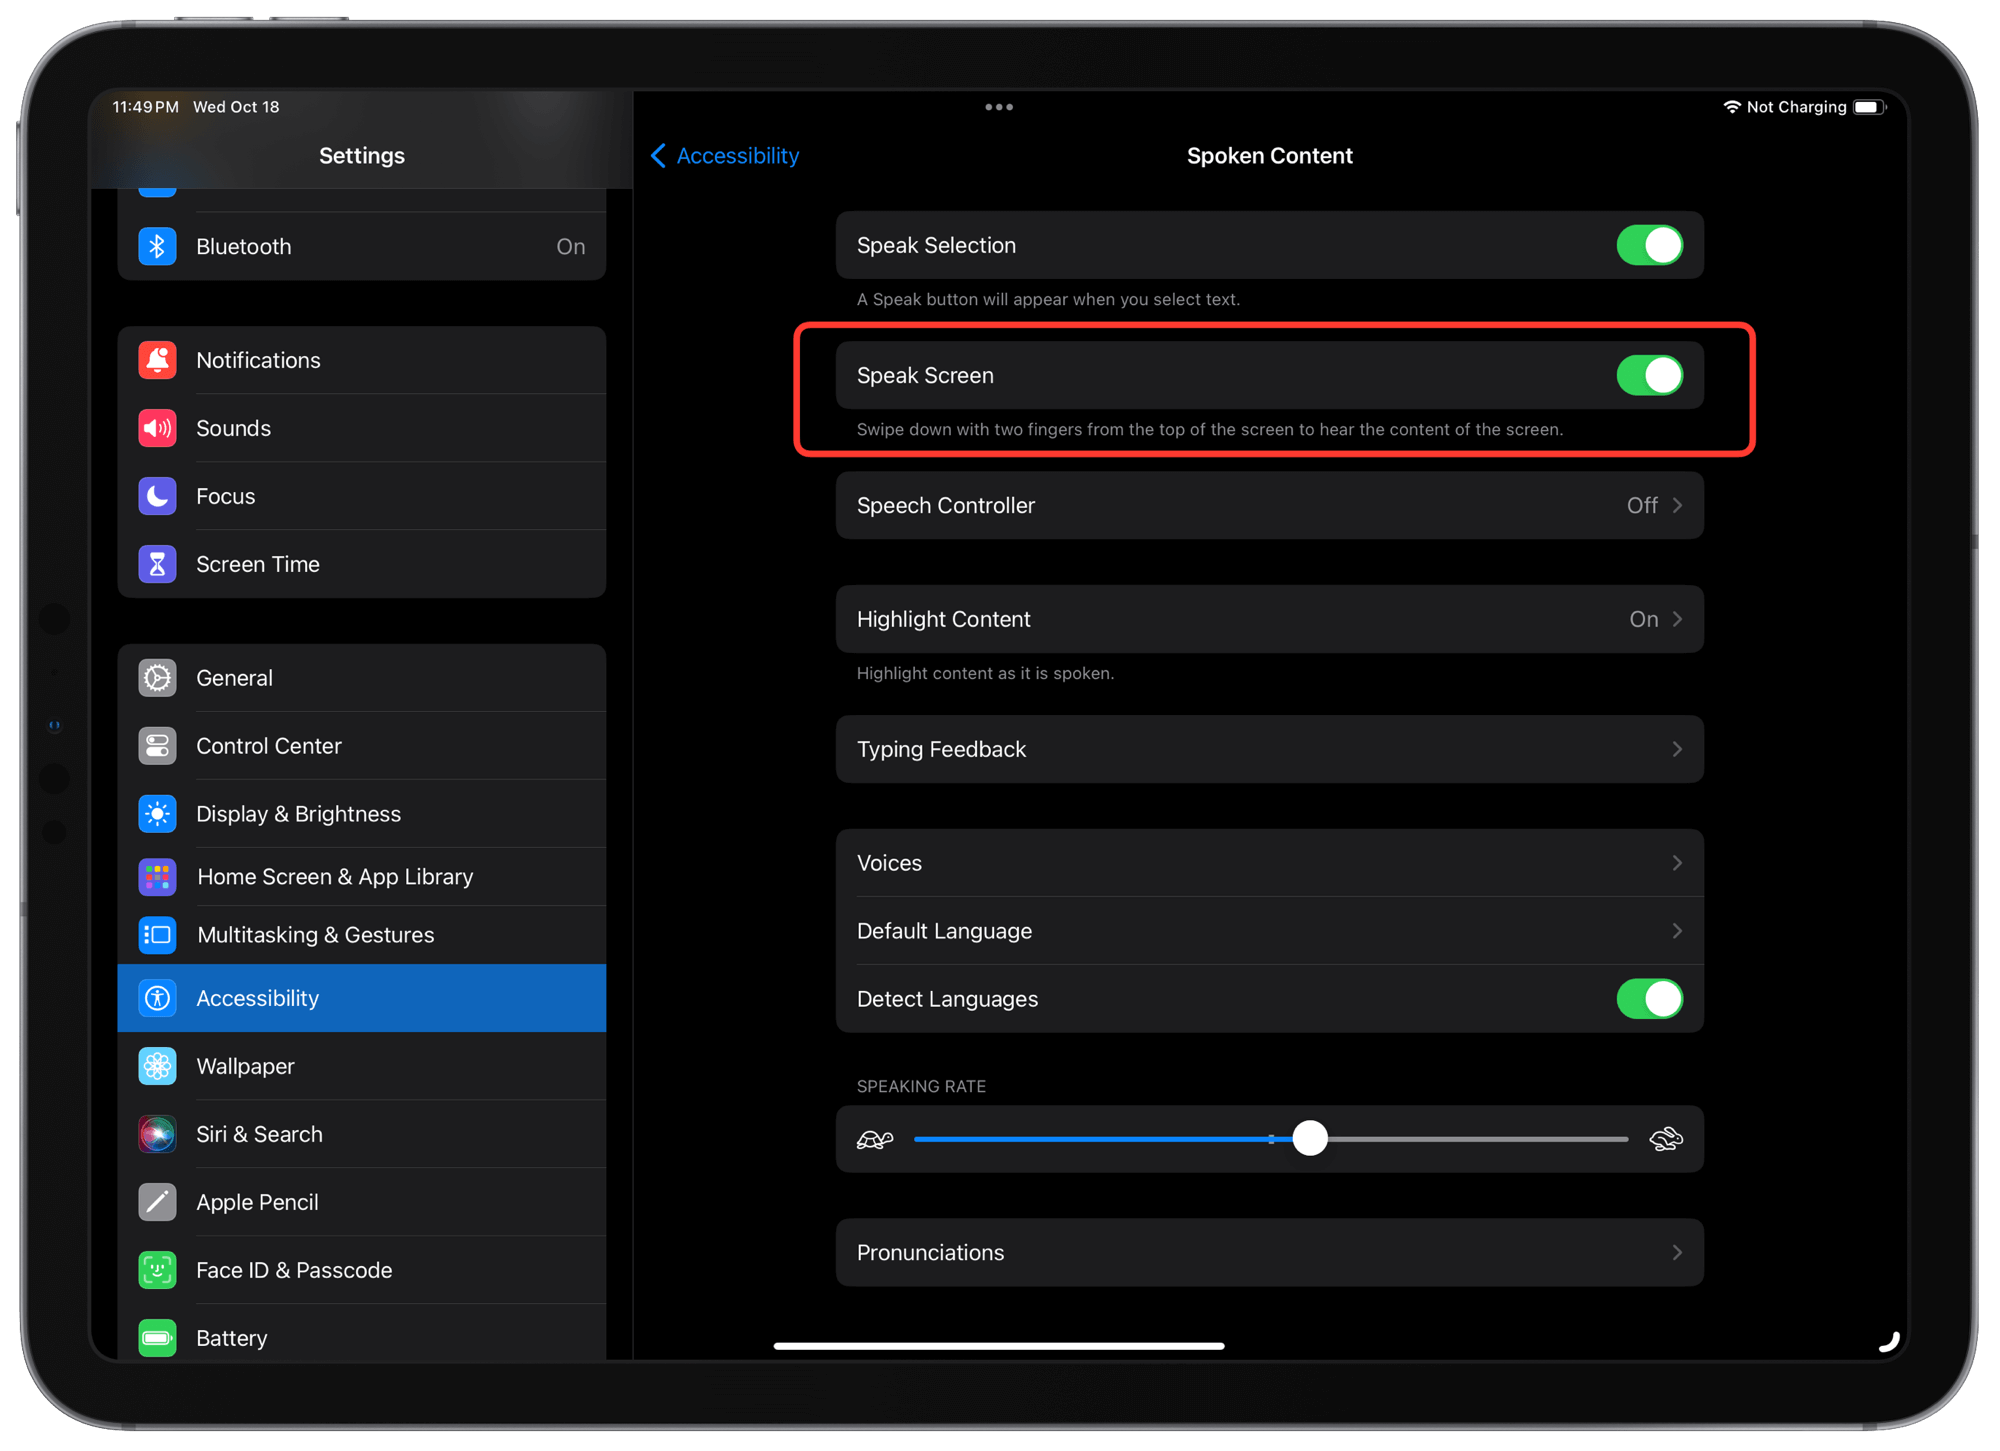 The Speak Screen option enabled in Settings → Accessibility.